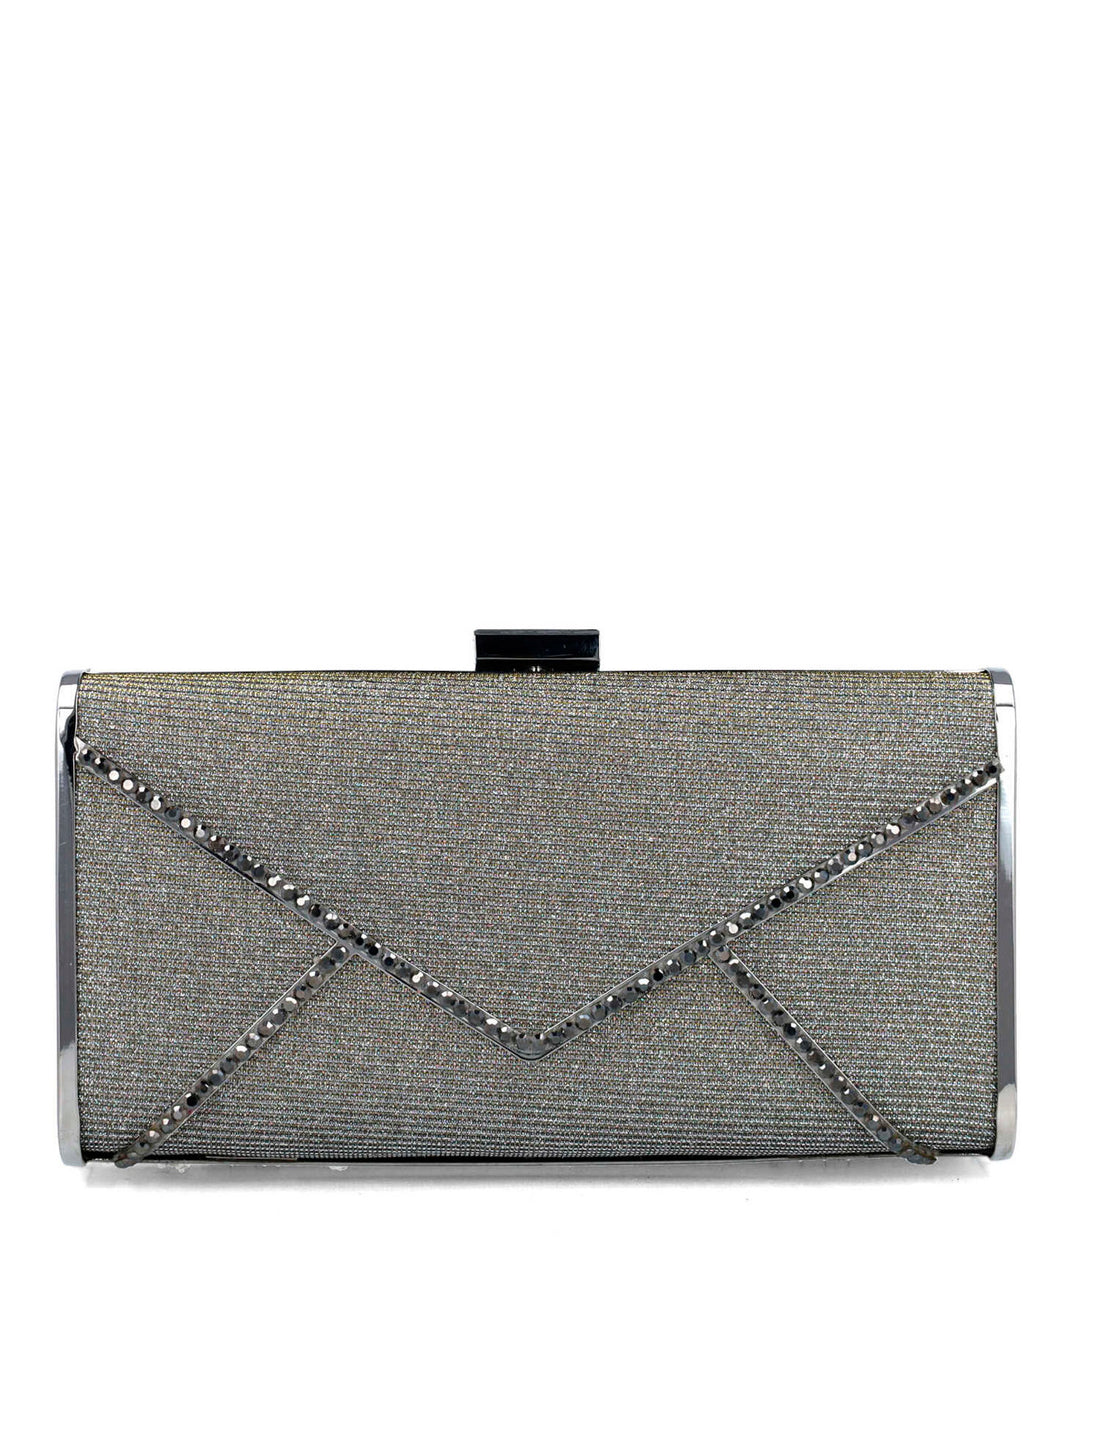 Grey Clutch With Silver Hardware_85656_71_01